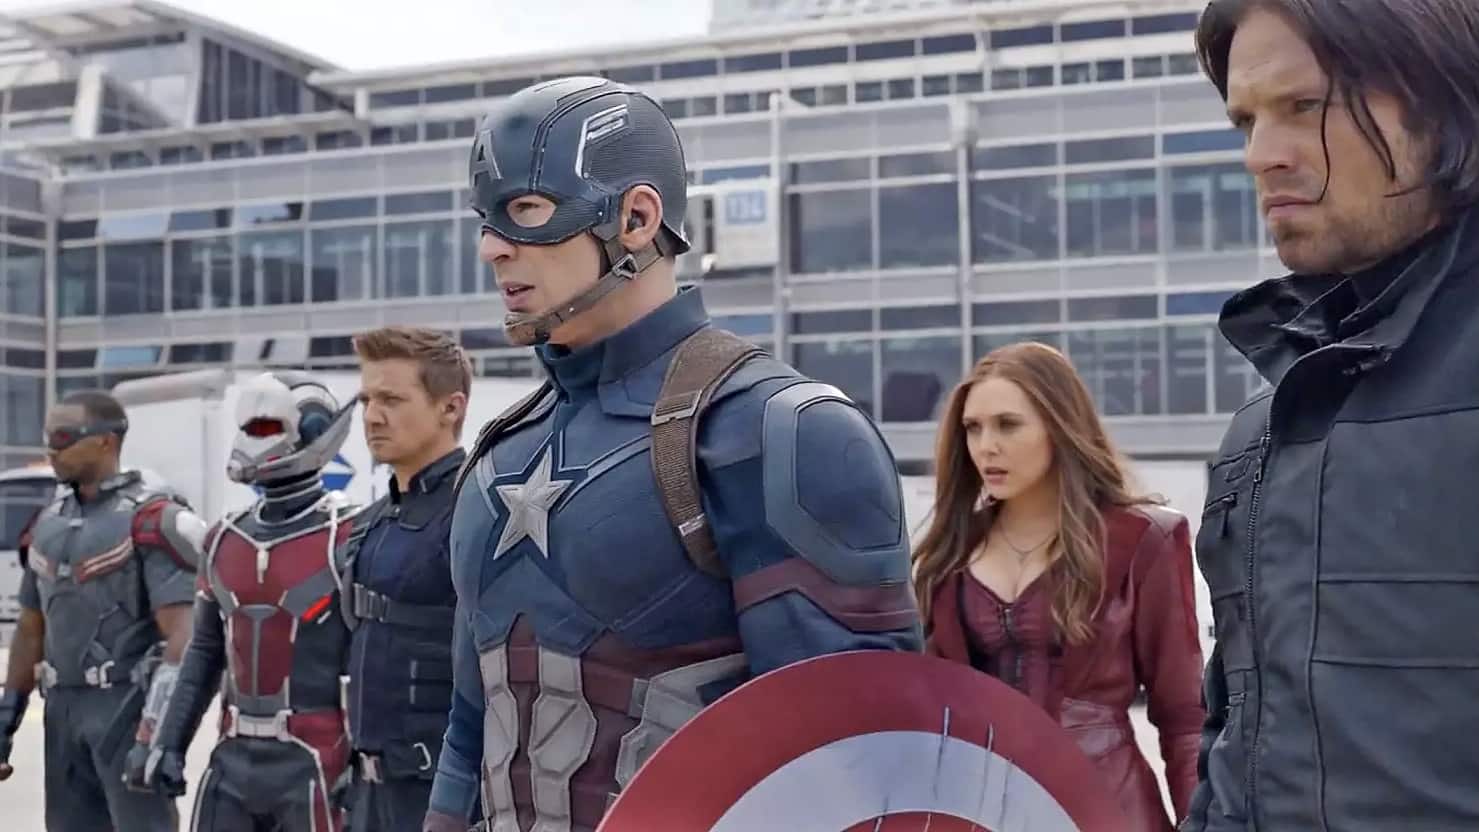 the-avengers-do-battle-in-captain-america-civil-war-during-phase-3-of-the-cinematic-universe